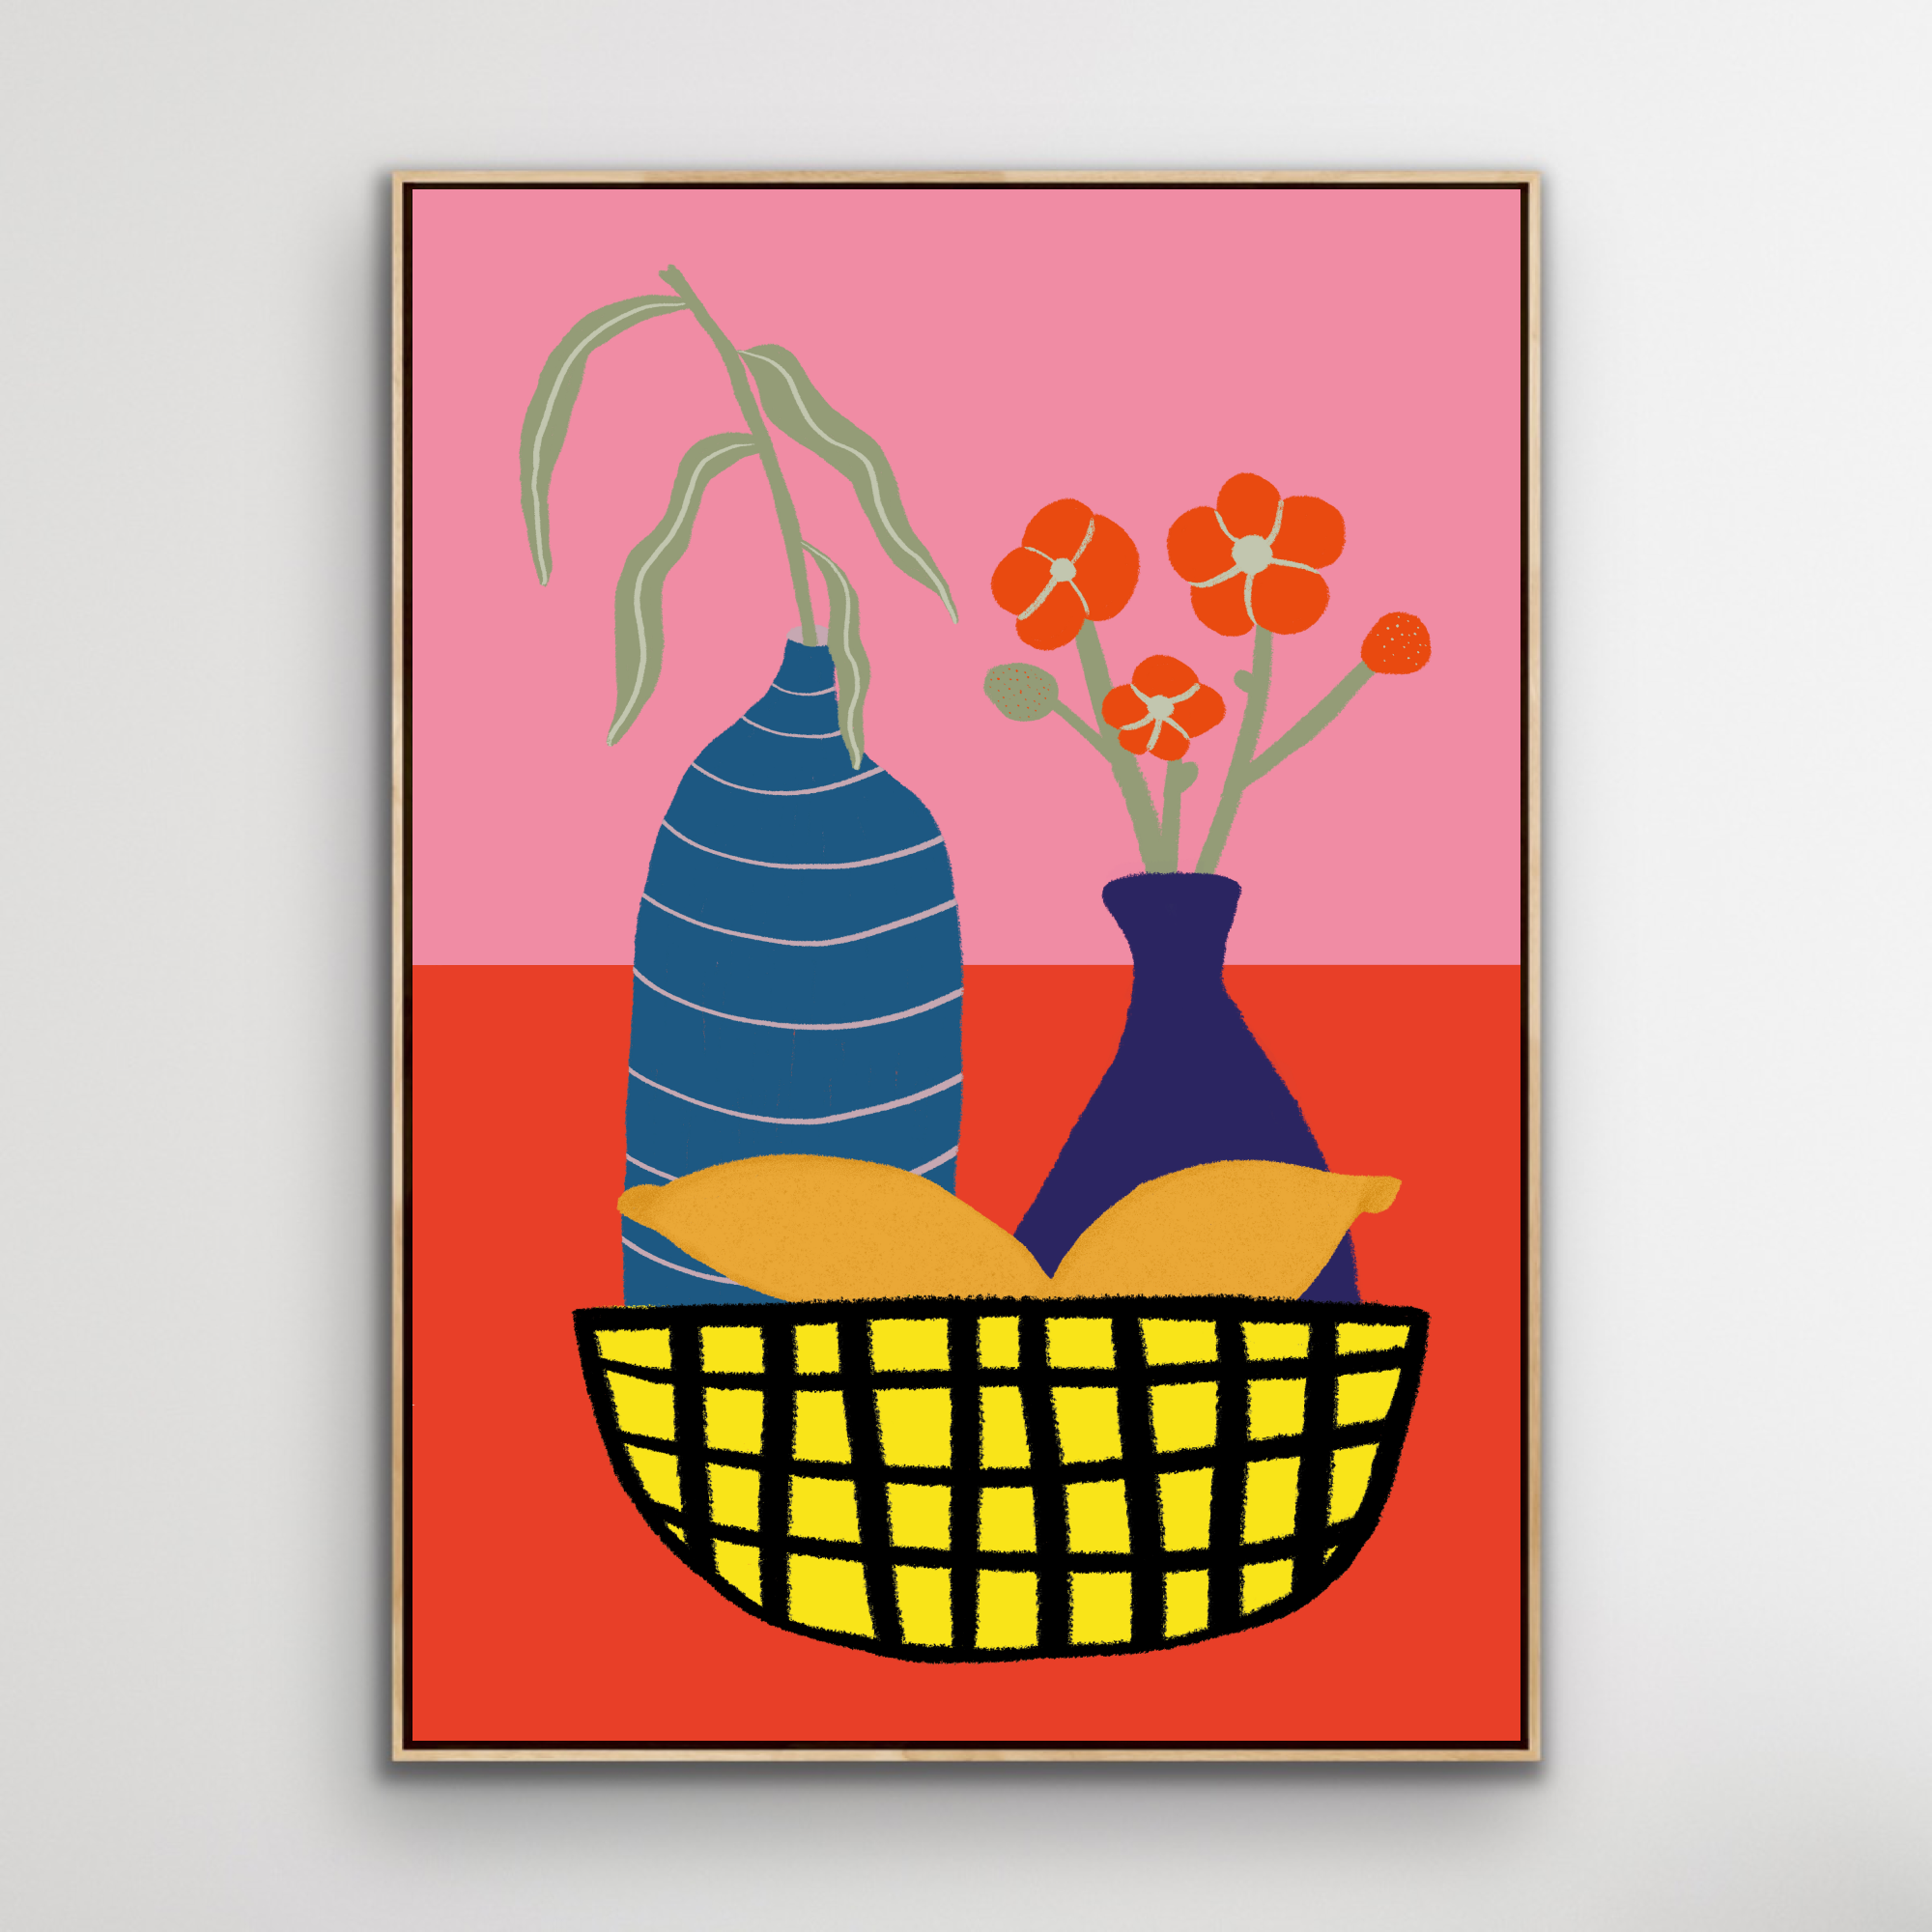 Canvas Print: "Bowl Of Happiness"